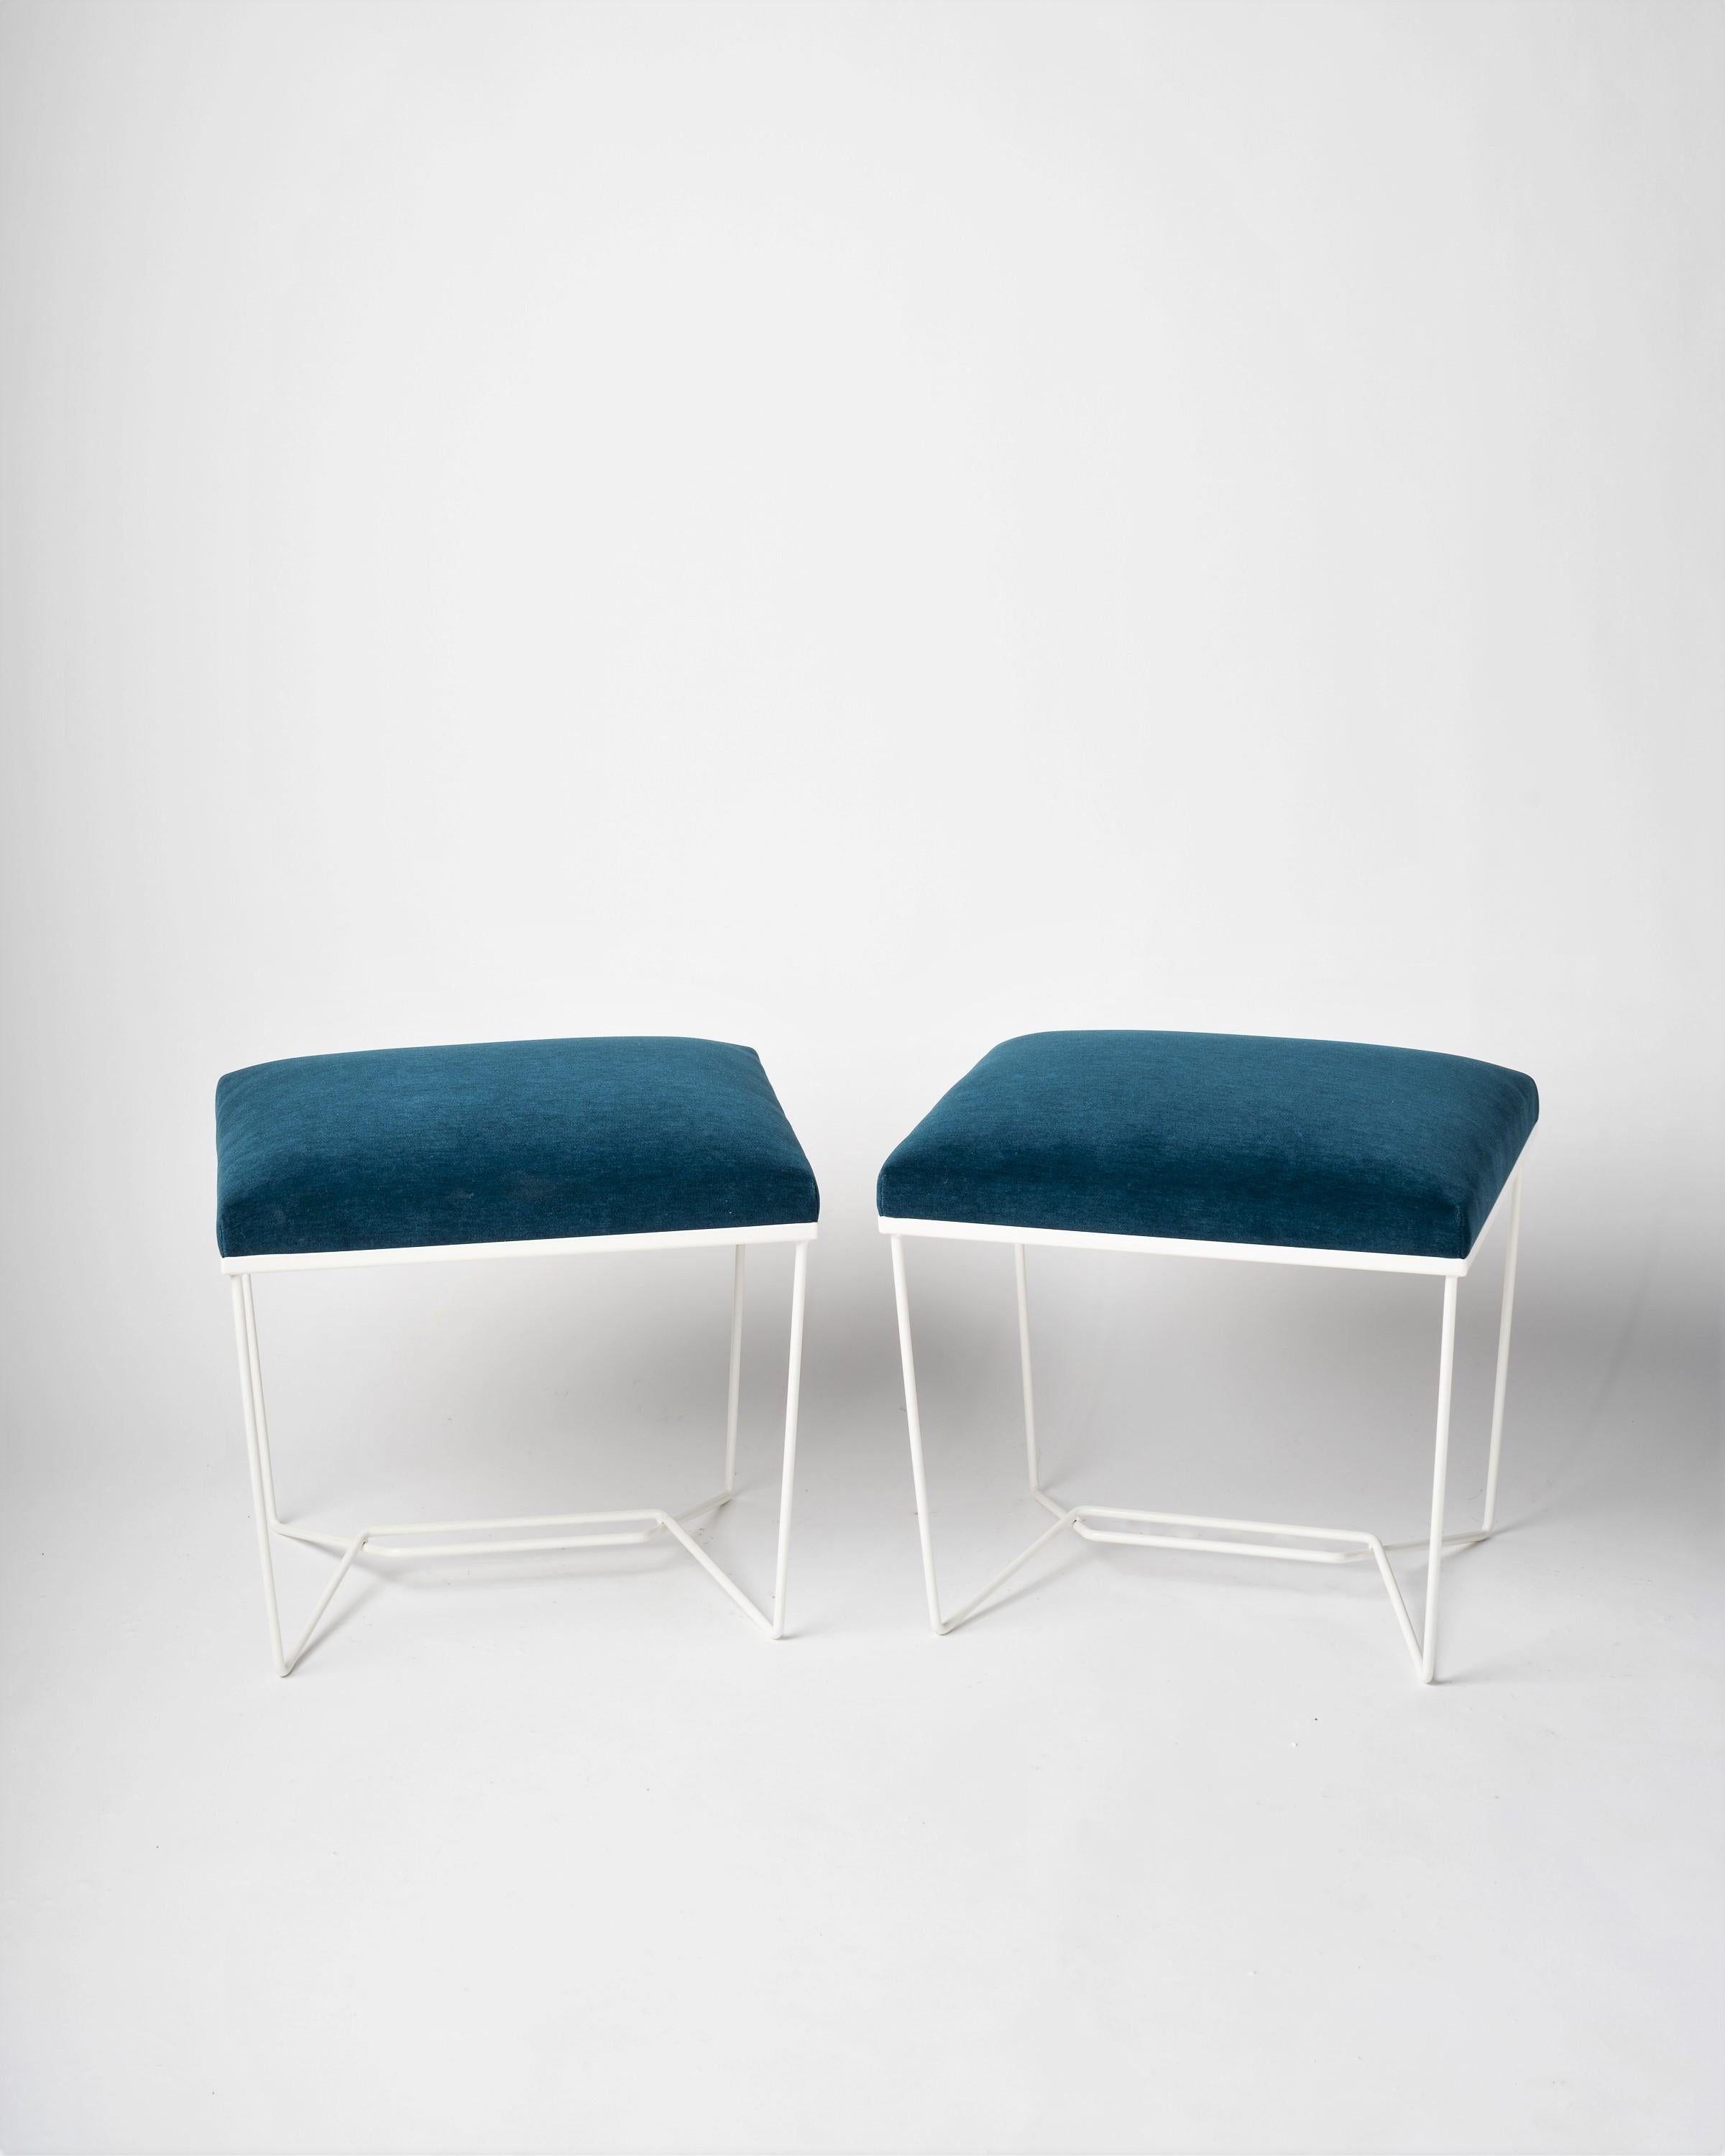 "Trombone" White Enamel & Blue Mohair Benches by Facto Atelier, France, 2020 For Sale